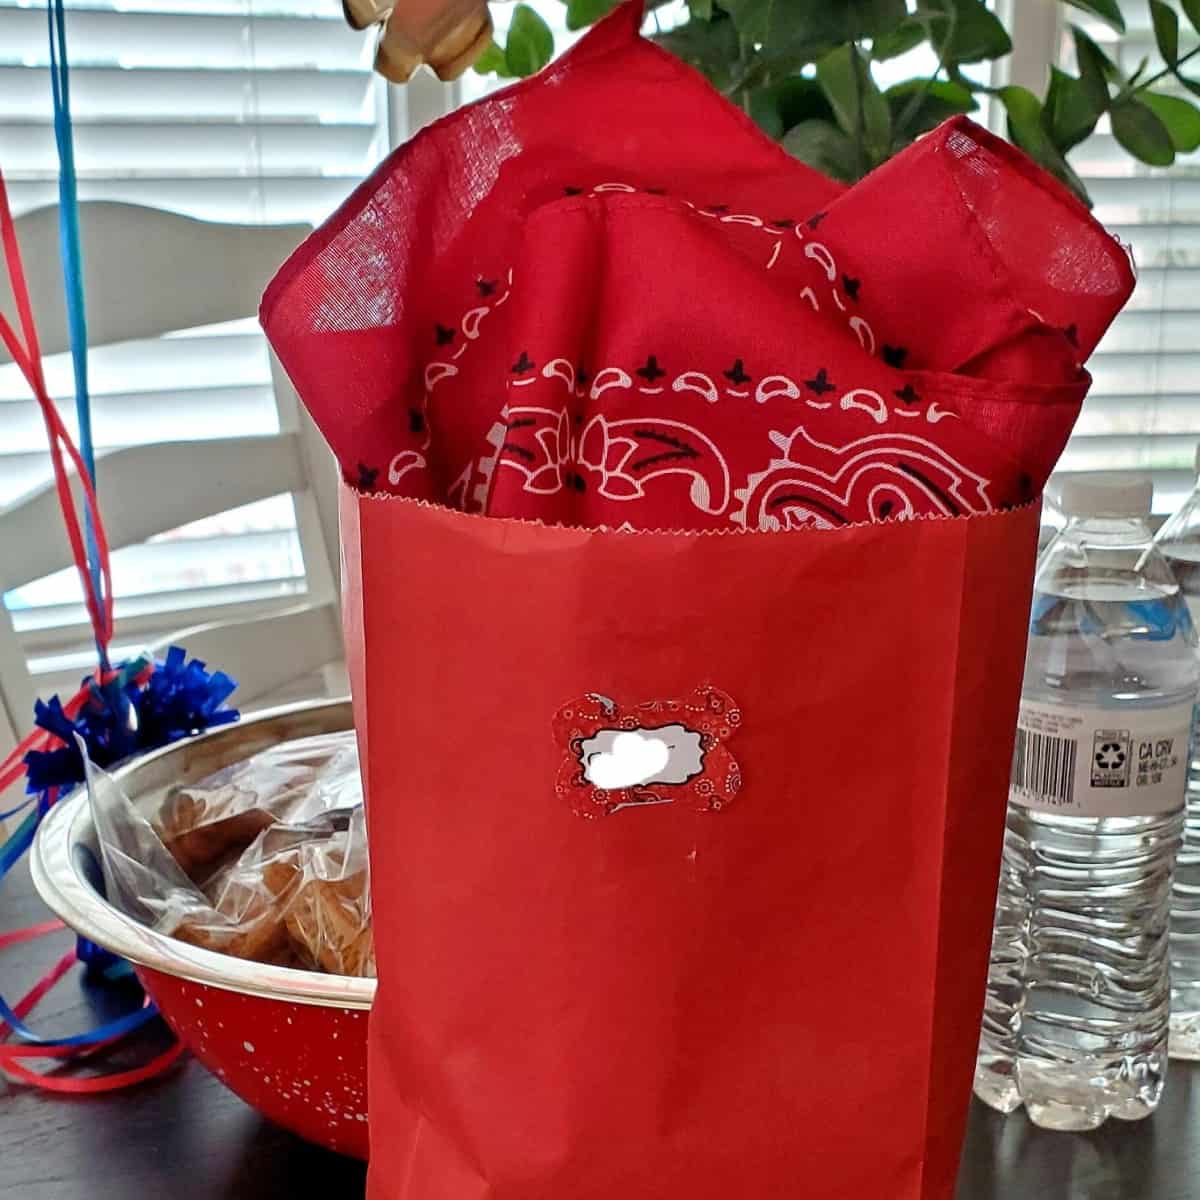 charlie the ranch dog party favors with red bandana and treats